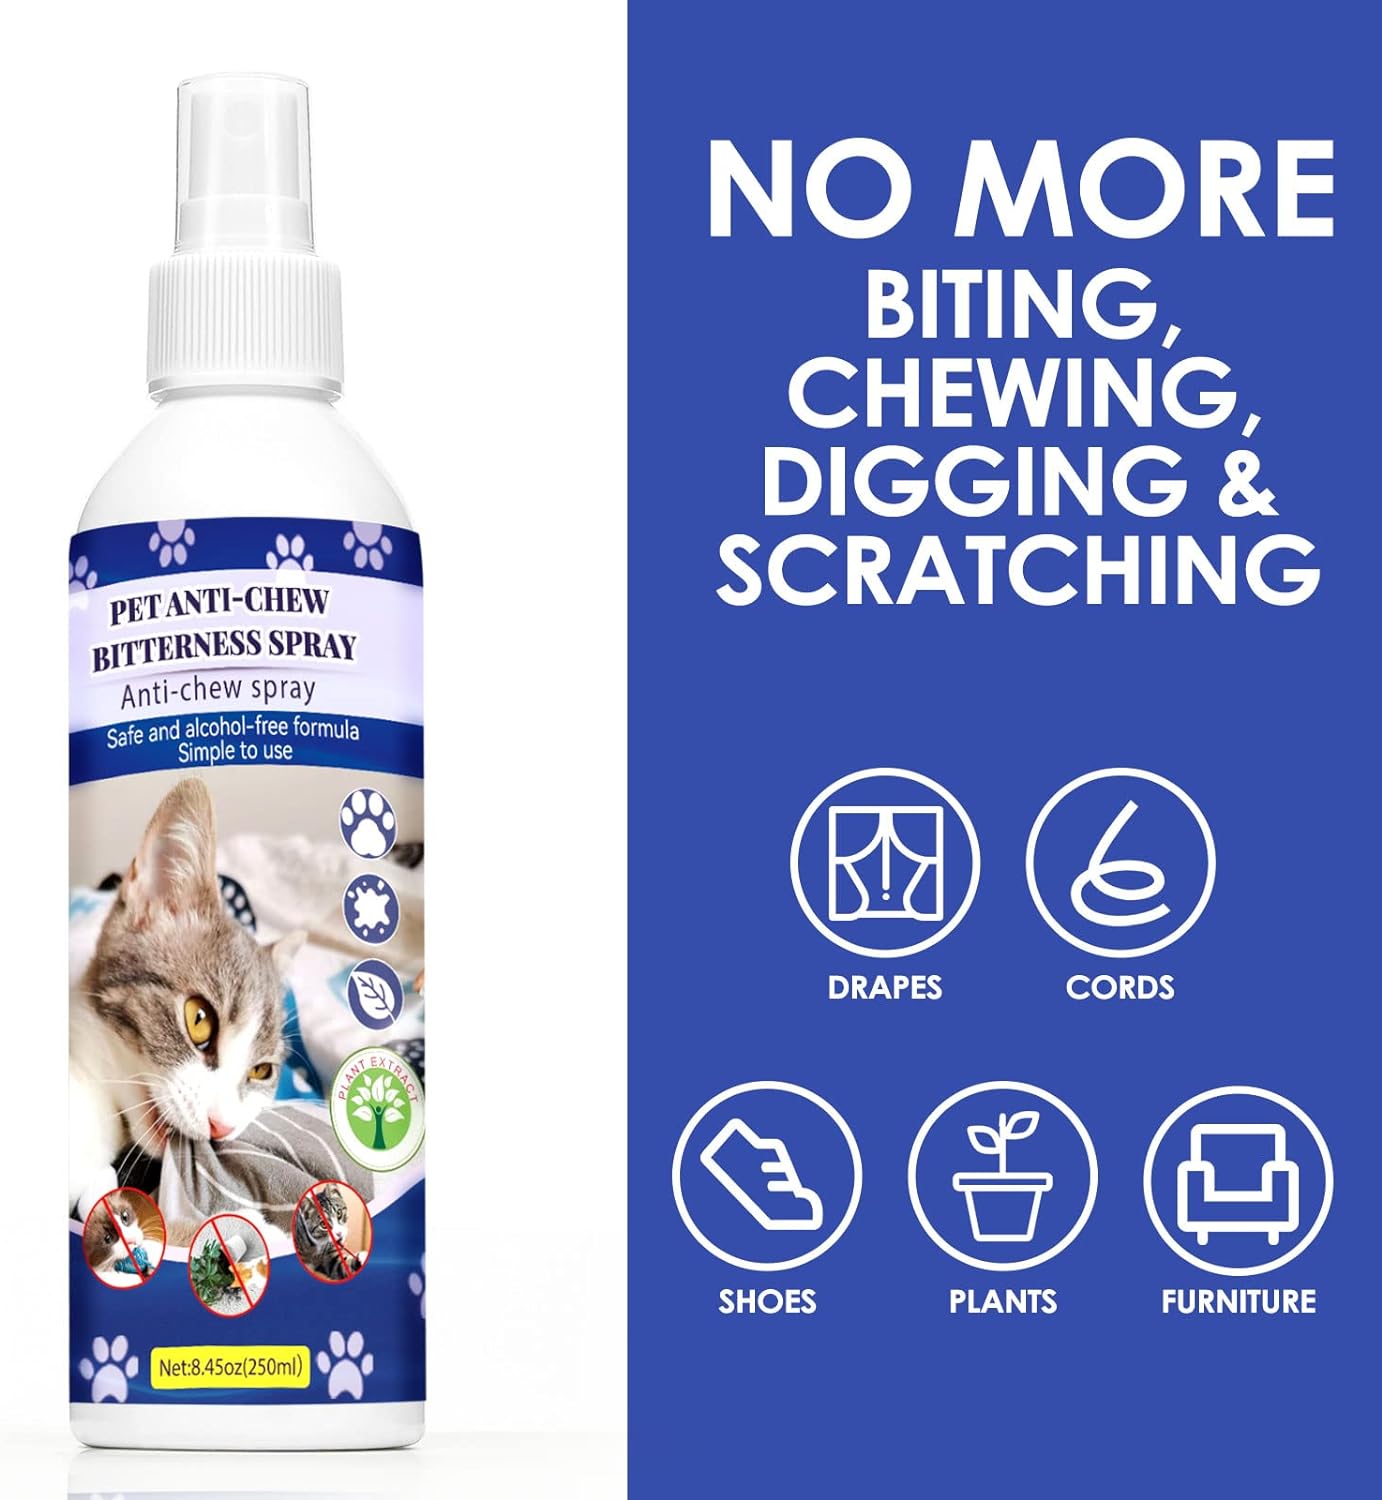 Cat Deterrent Spray for Indoor and Outdoor Use, Cat Repellent Spray for Furniture, No Scratch Spray for Cats, Anti-Scratch Cat Training Spray